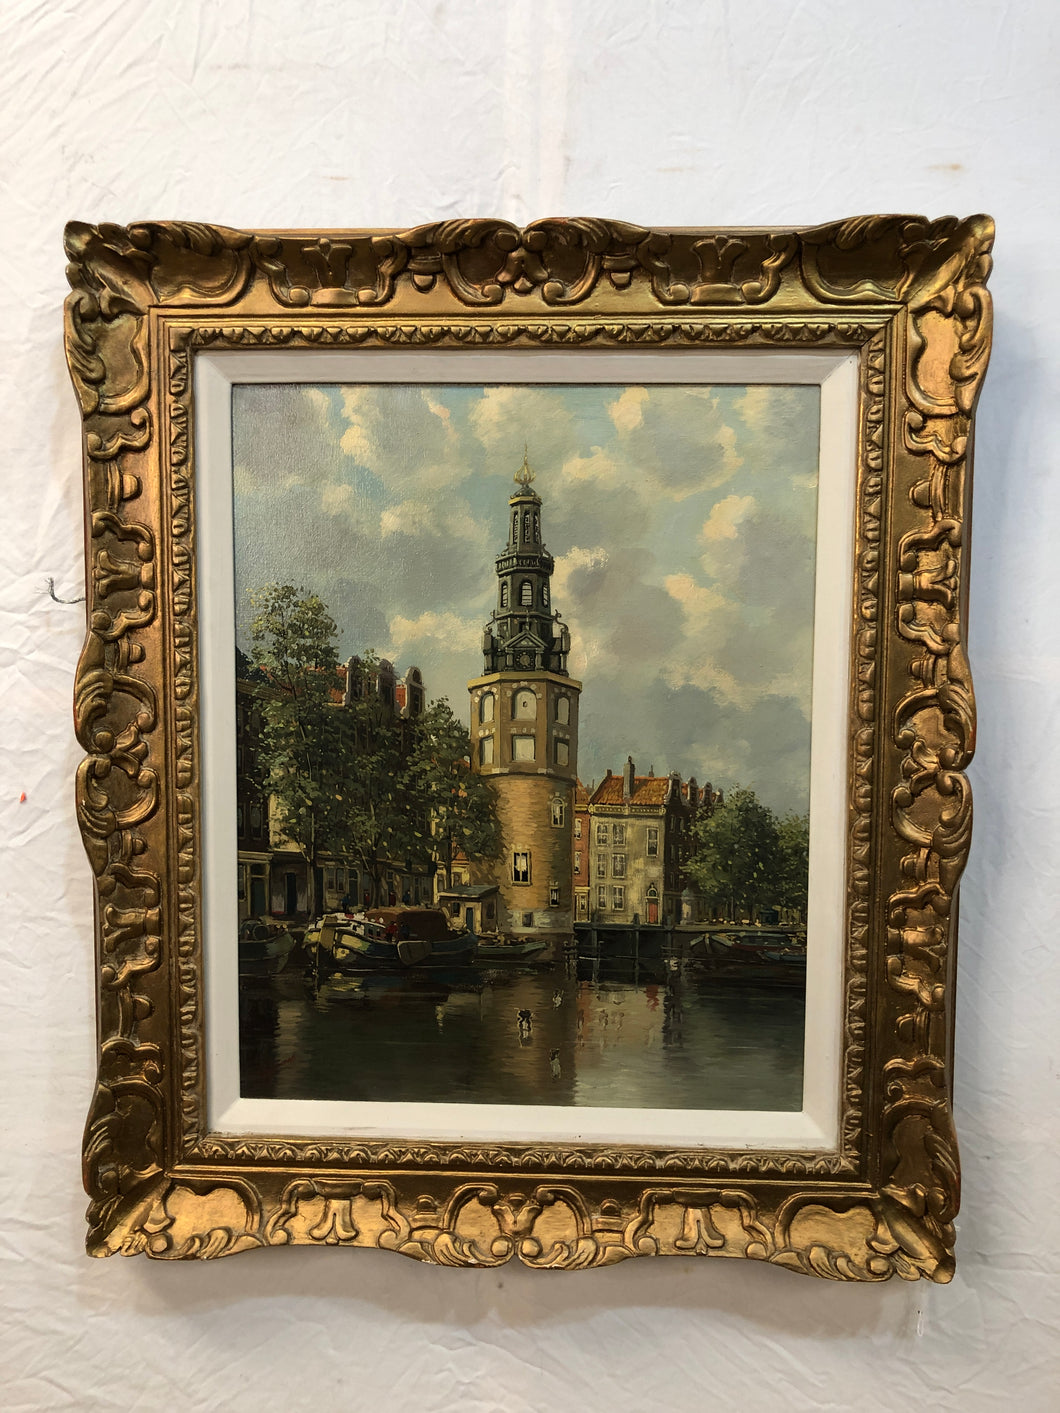 Clock Tower Antique Original Oil on Canvas Signed at the Bottom